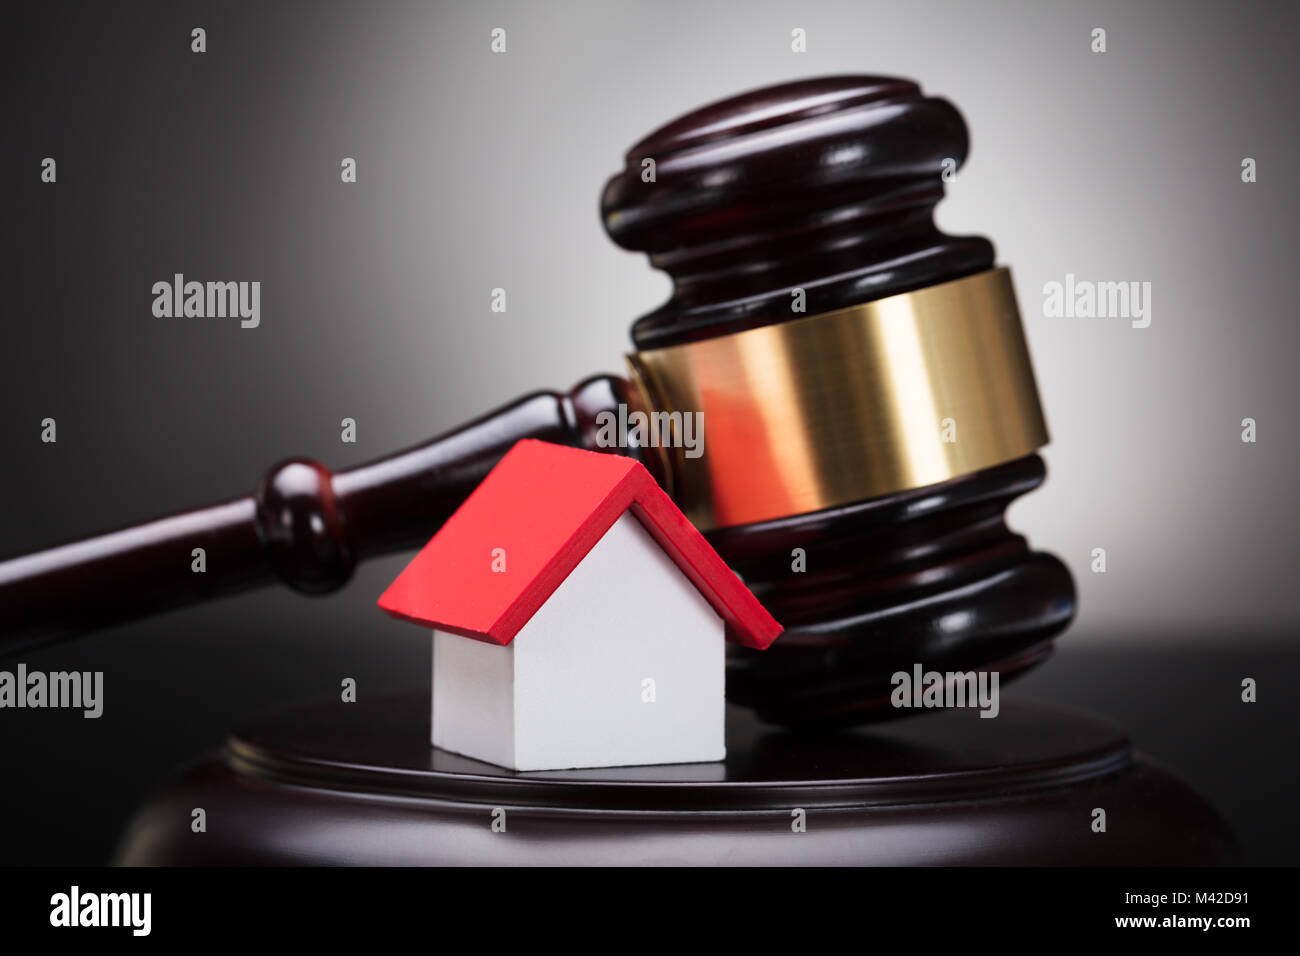 Close-up Of Gavel And House Model On Sounding Block Against Grey Background Stock Photo